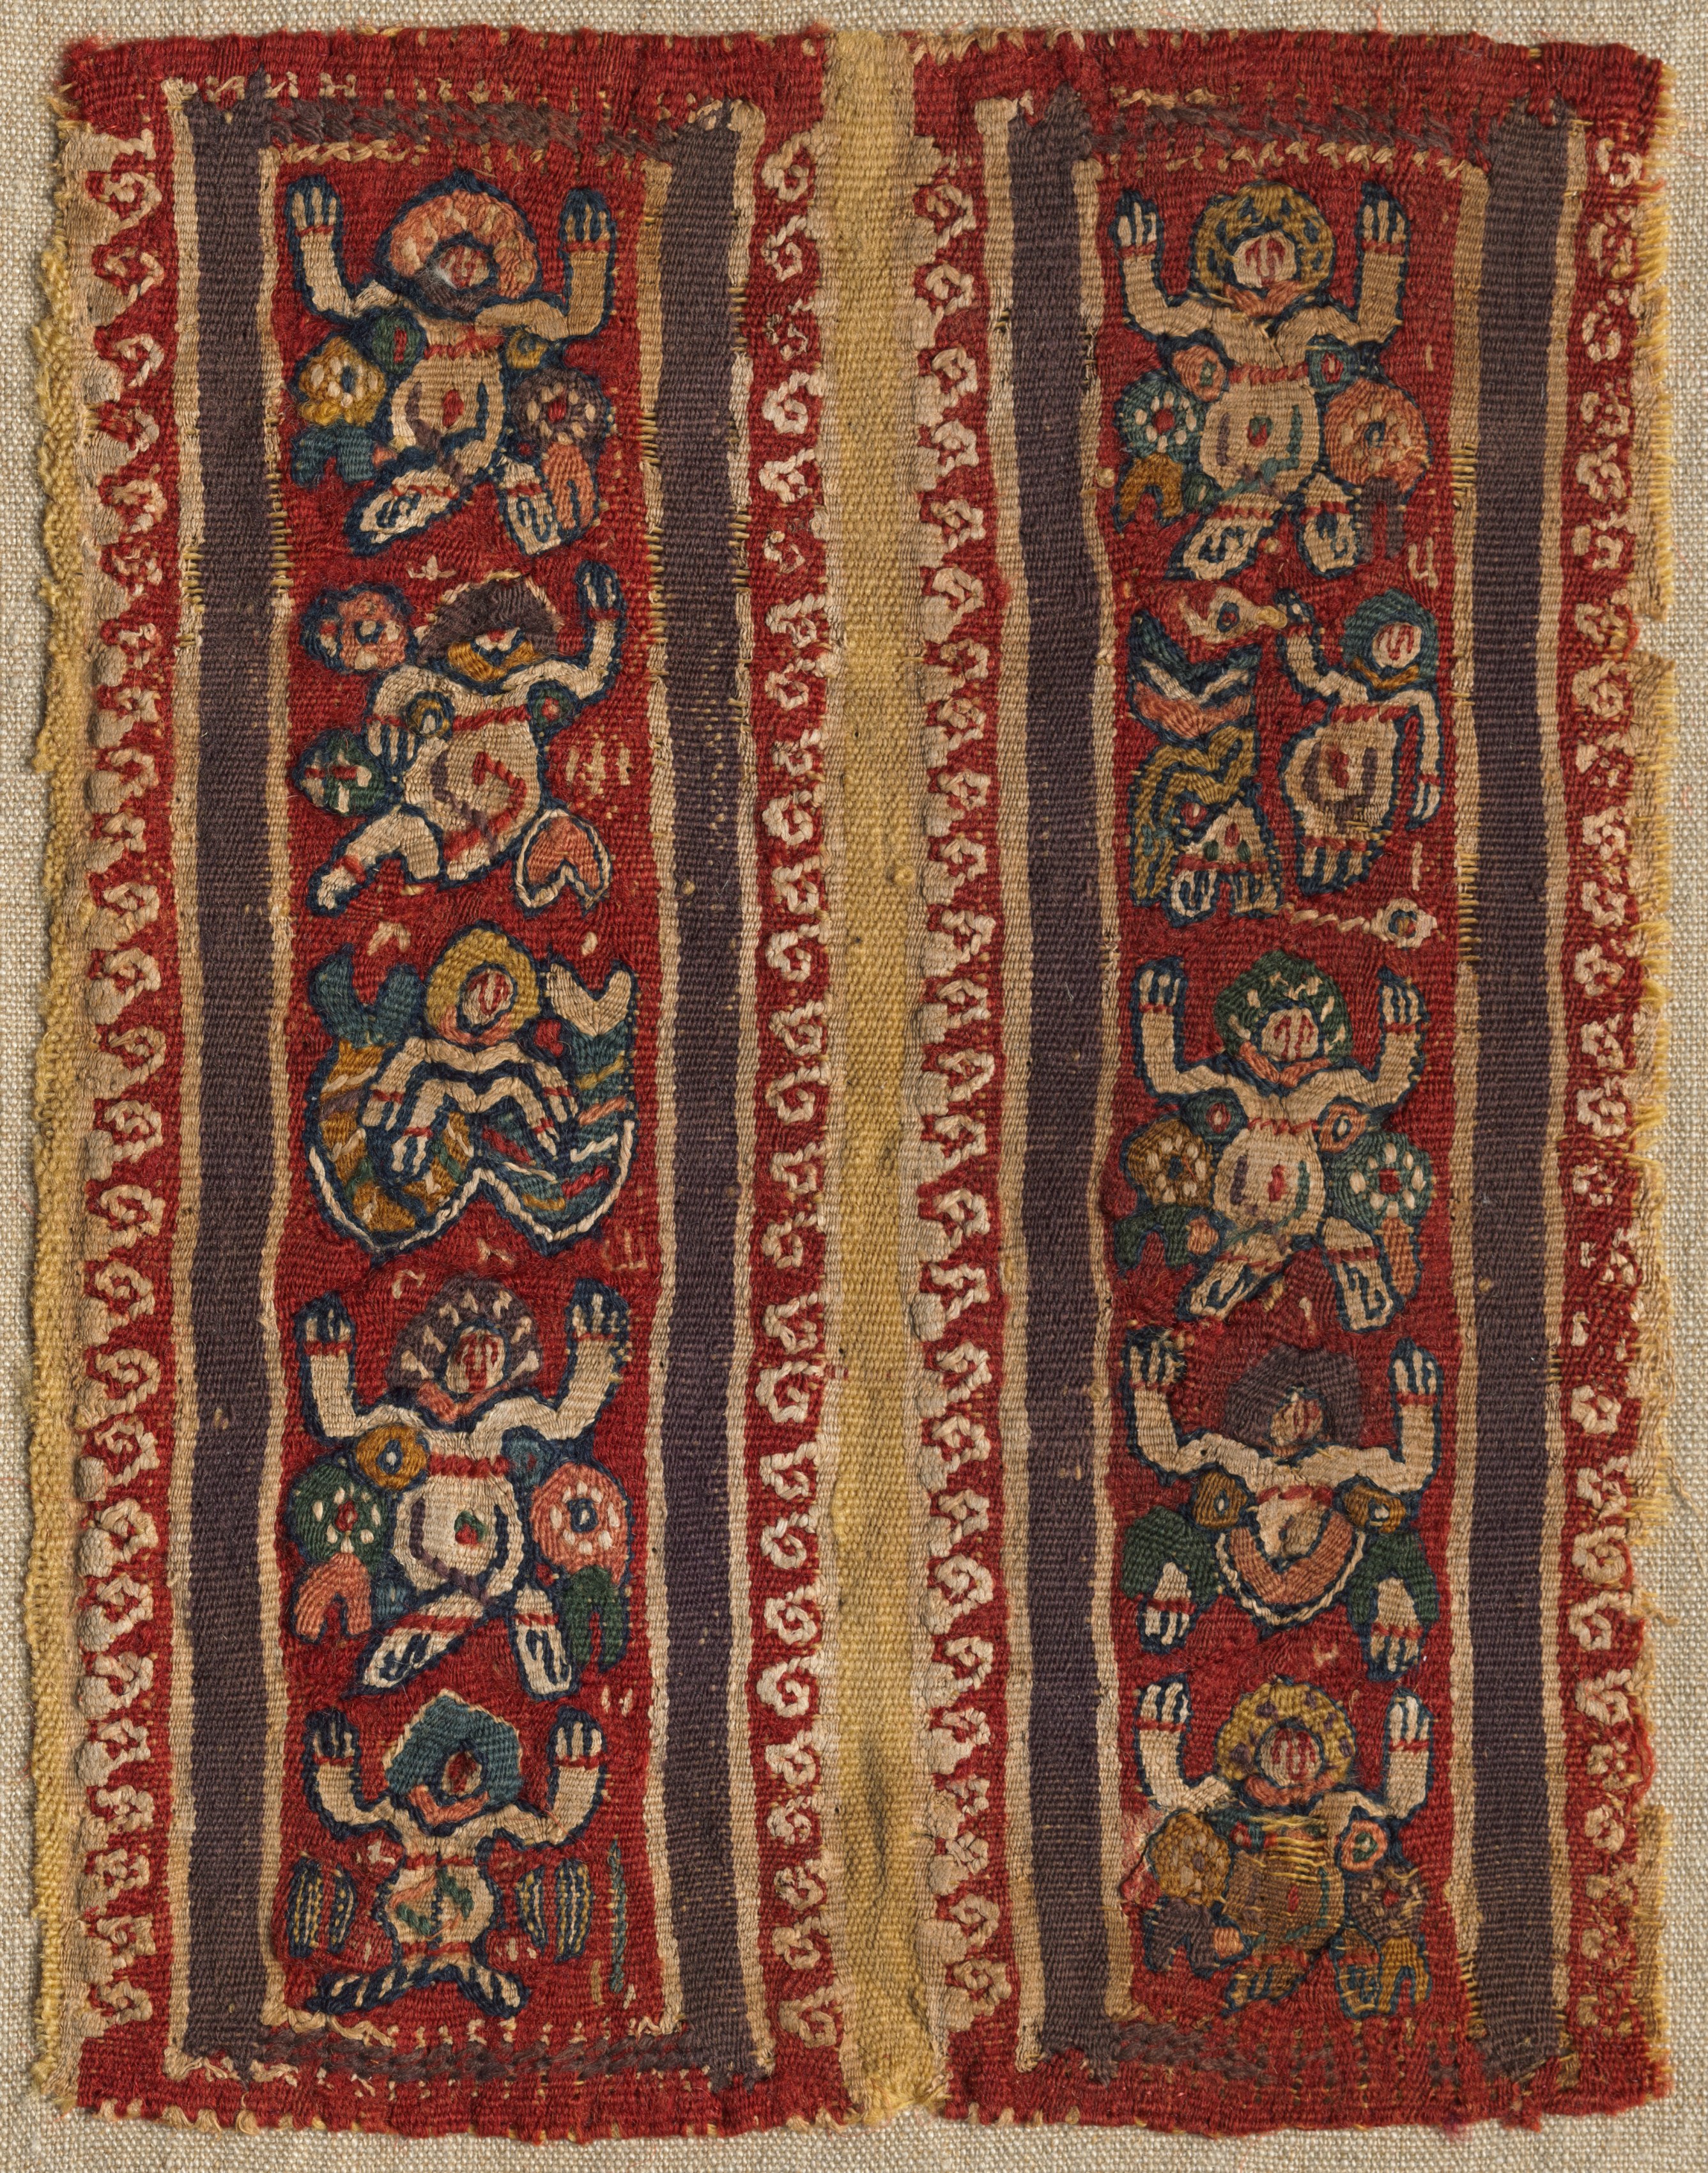 Fragment, Sleeve Ornament of a Tunic